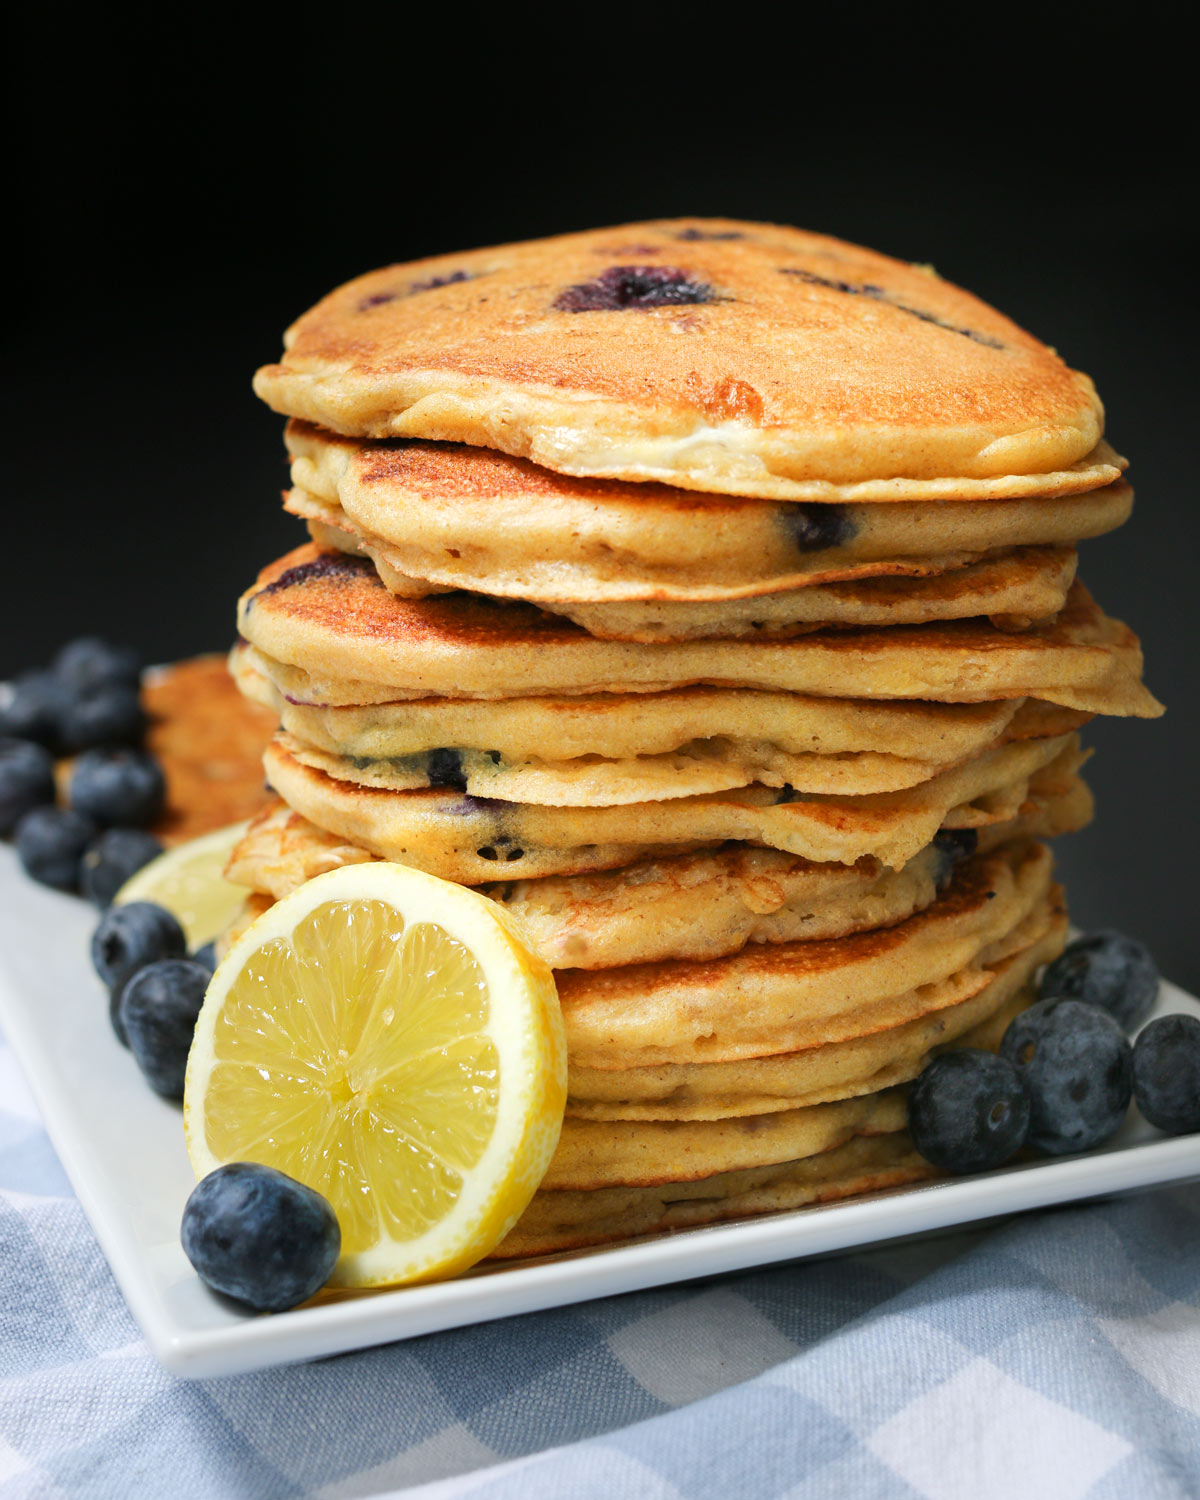 stack of blueberry pancakes with a lemon slice on the platter.